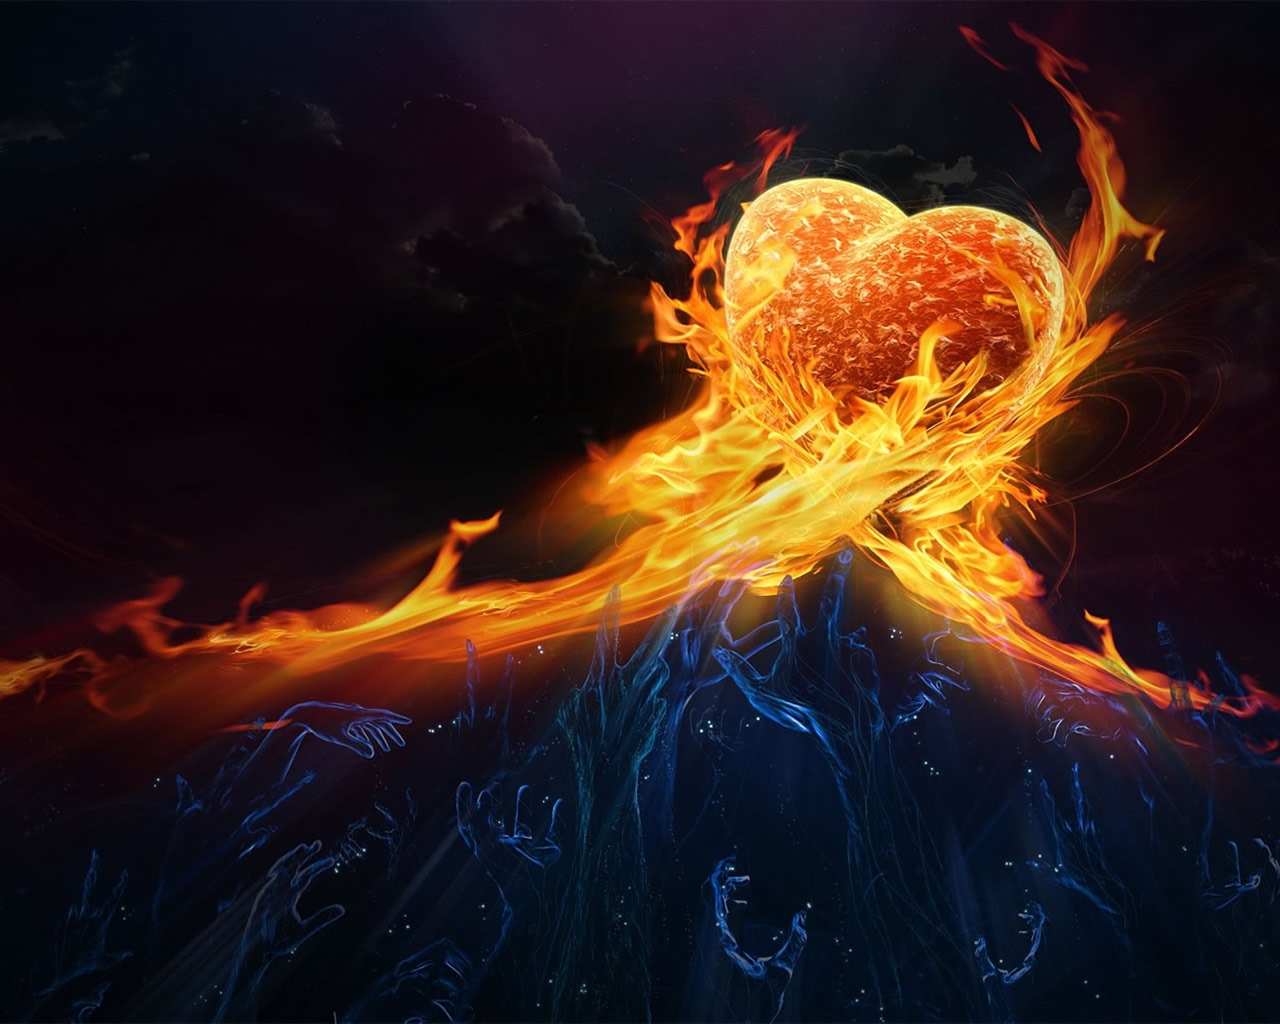 Heart in Fire for 1280 x 1024 resolution